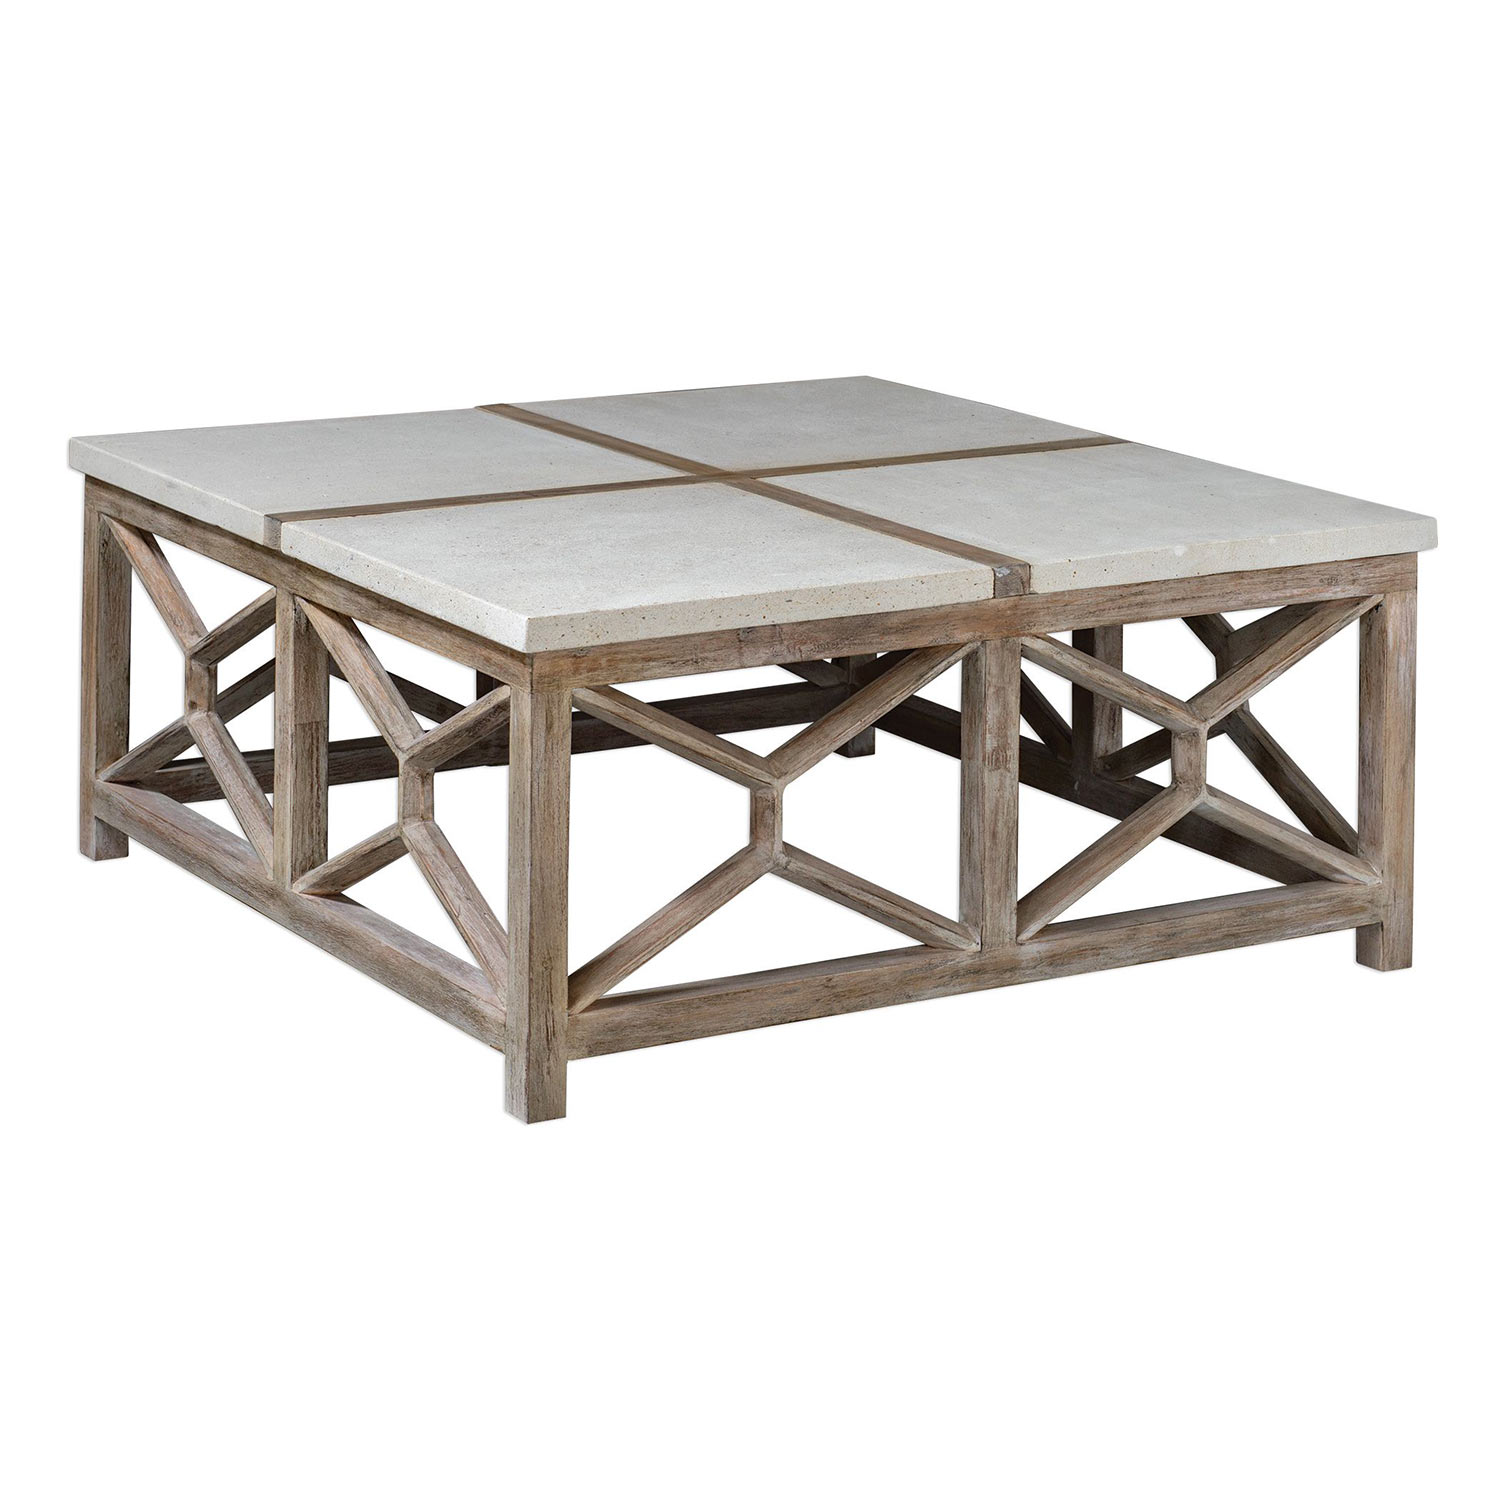 Uttermost Catali Coffee Table - Stone